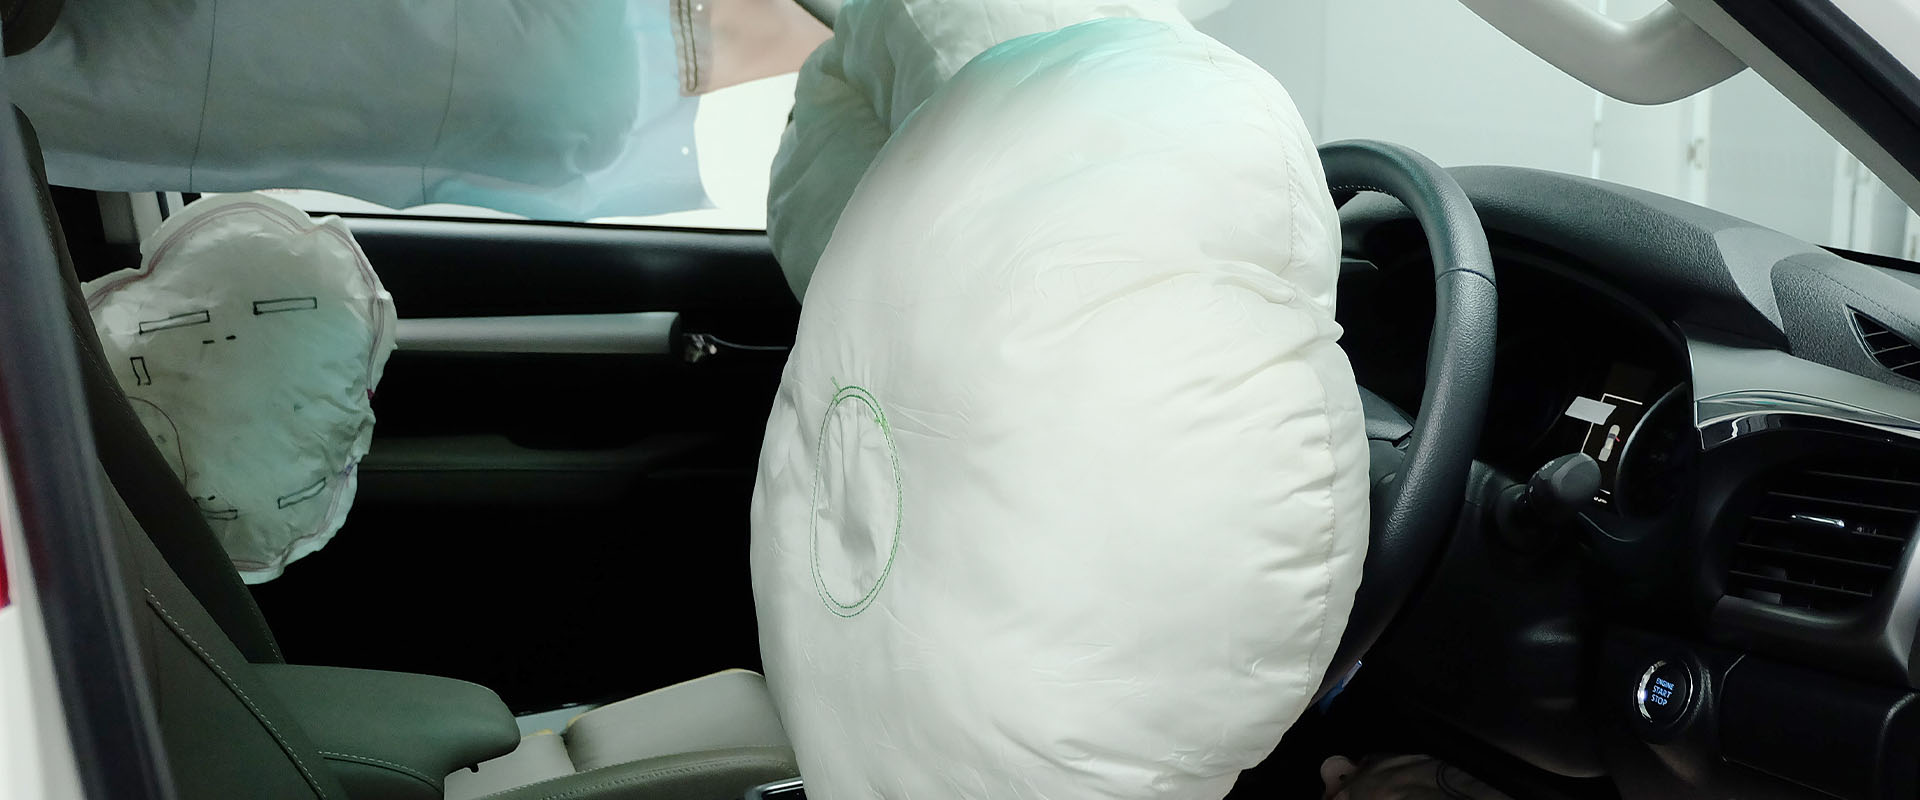 Airbag Explosion